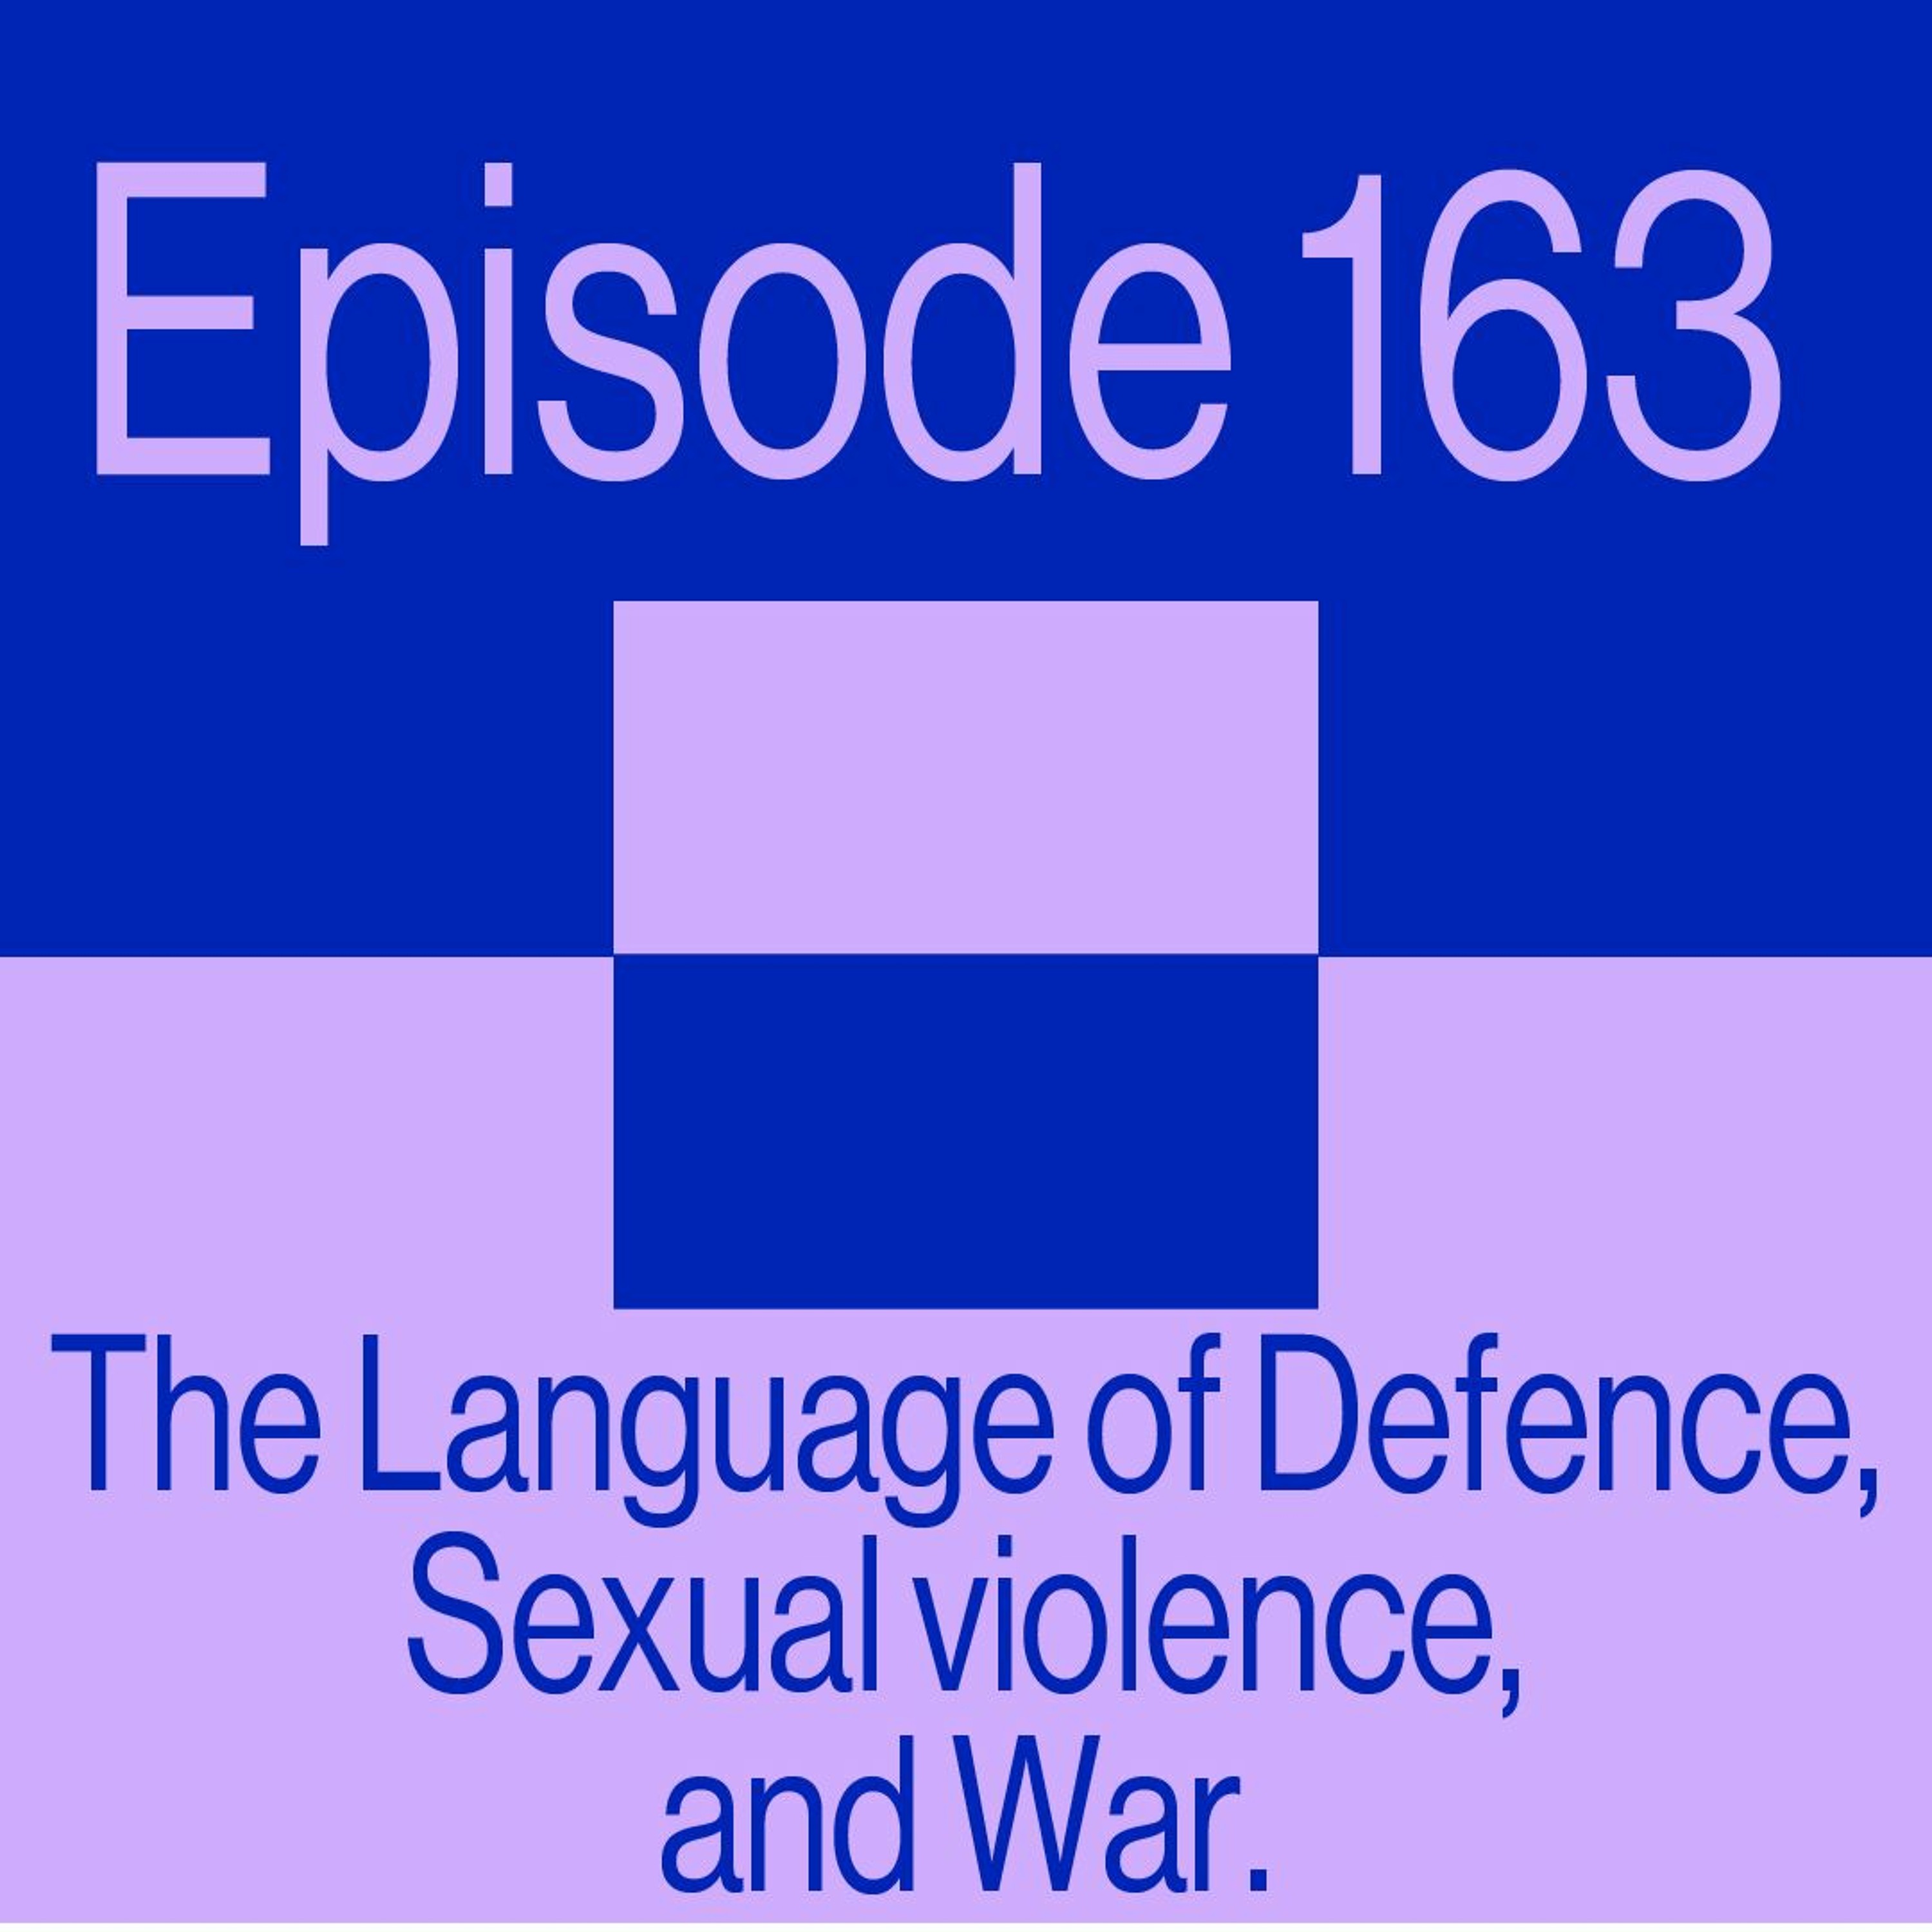 Episode 163: The Language of Defence, Sexual Violence, and War